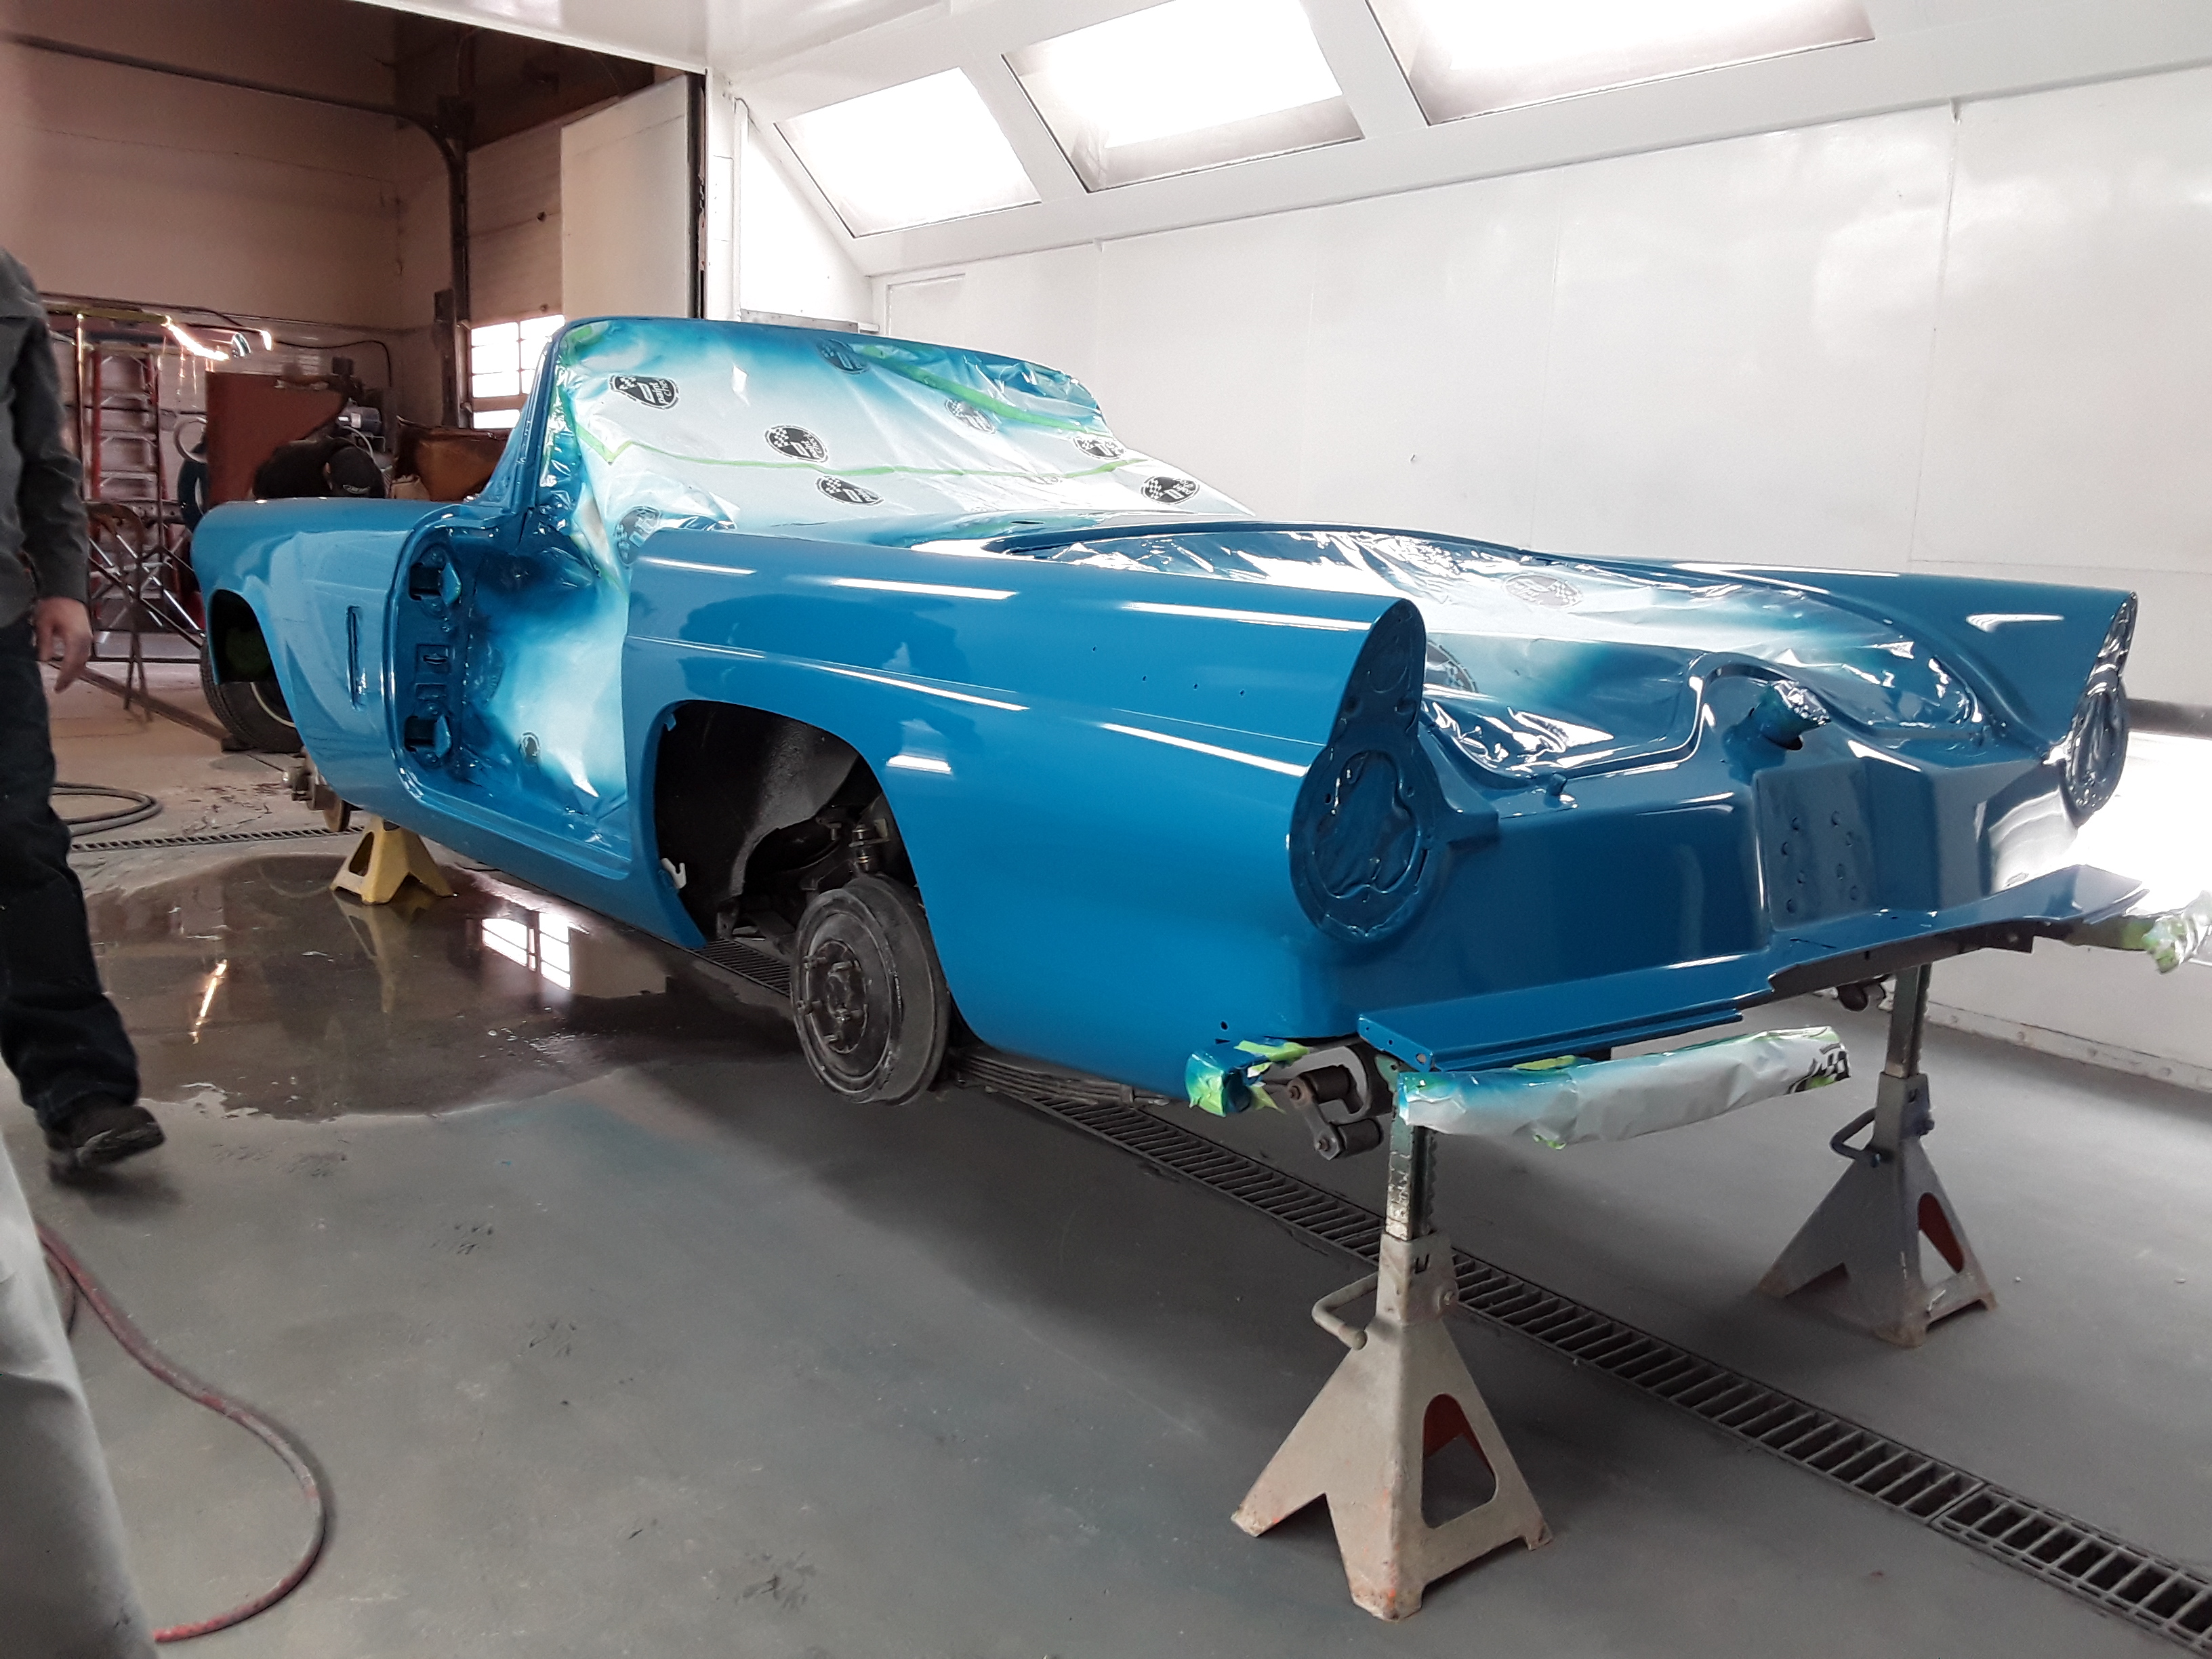 1956 Ford T-Bird  Peacock Teal Blue in the paint booth